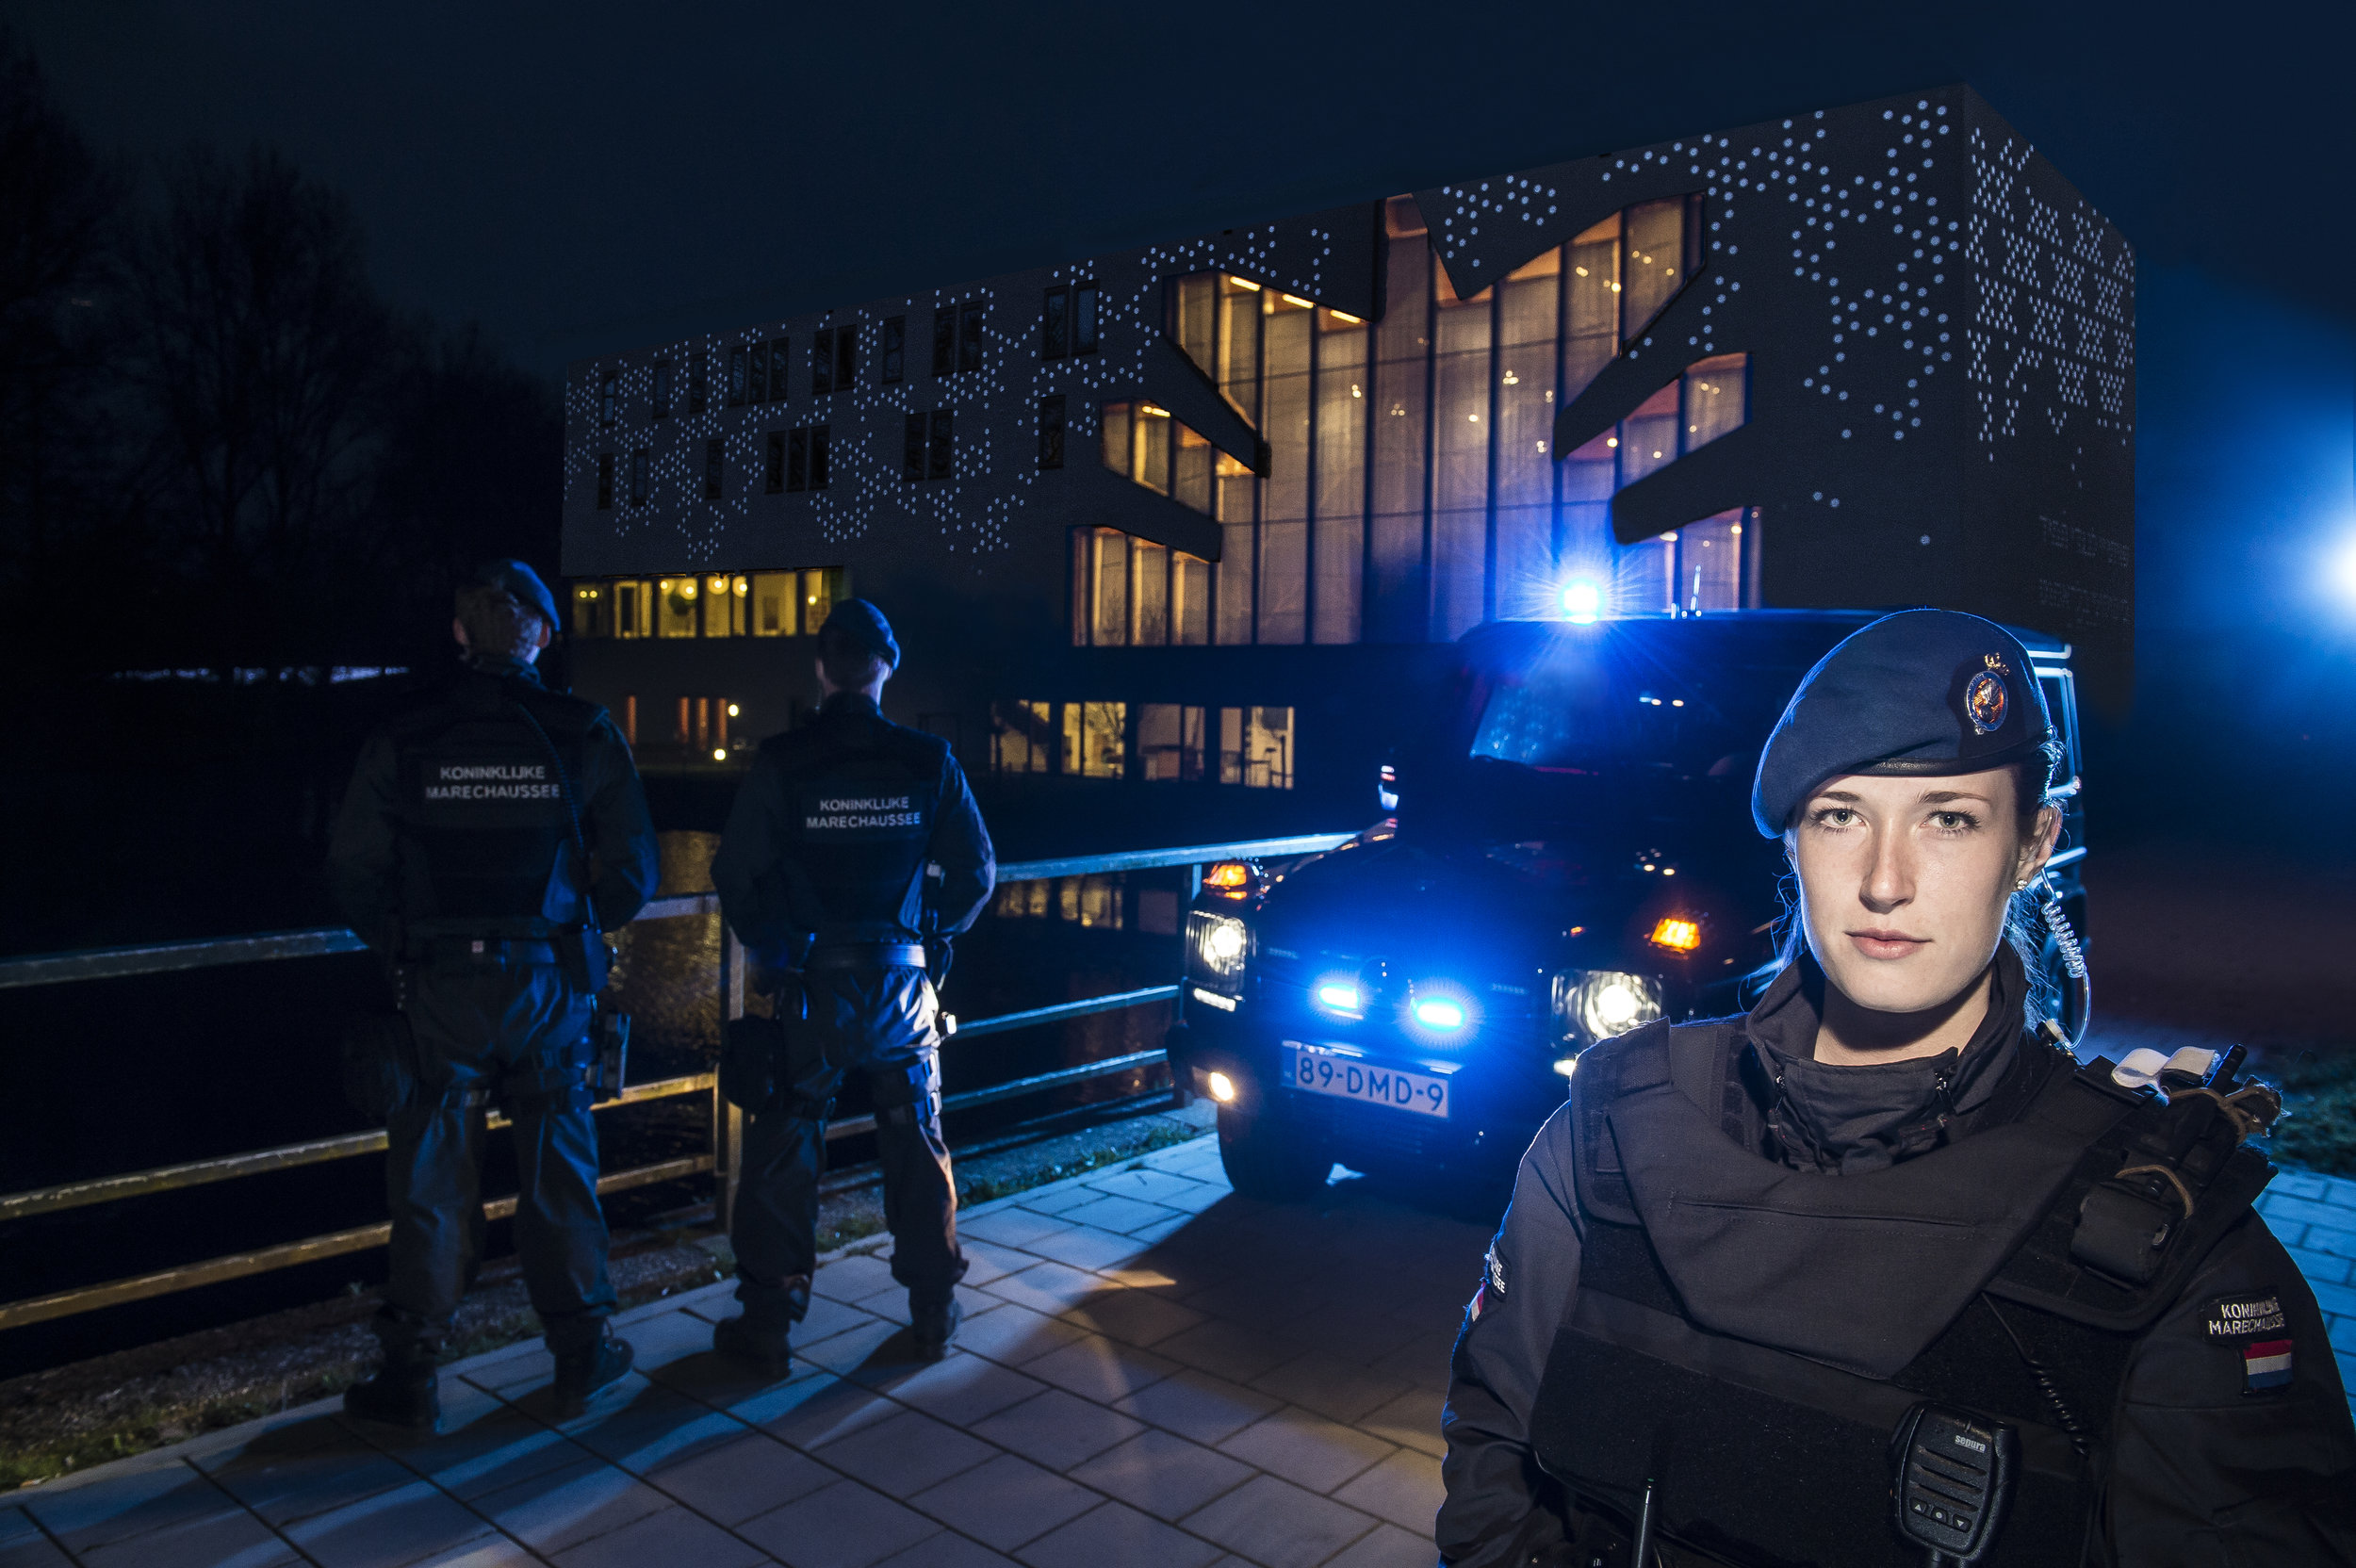 Dutch Military Police guarding high risk property